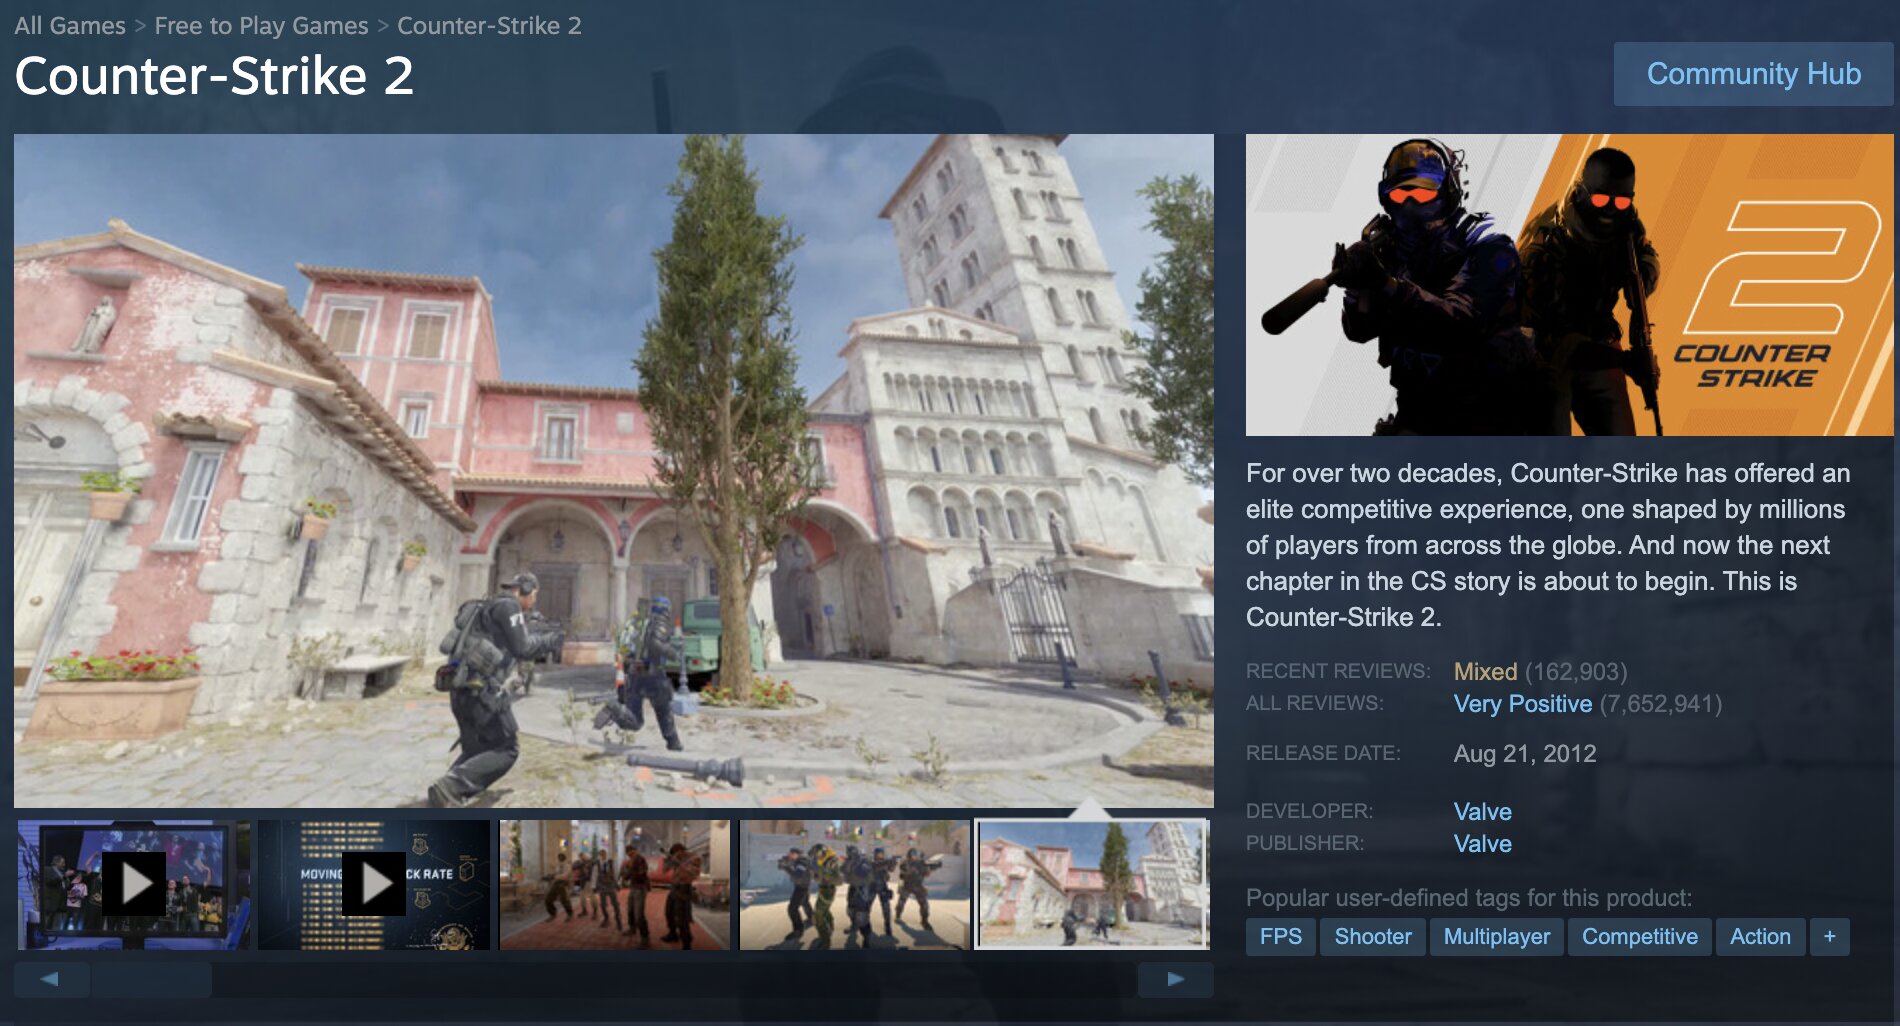 Counter Strike 2: Now Available for Free on Steam for Everyone